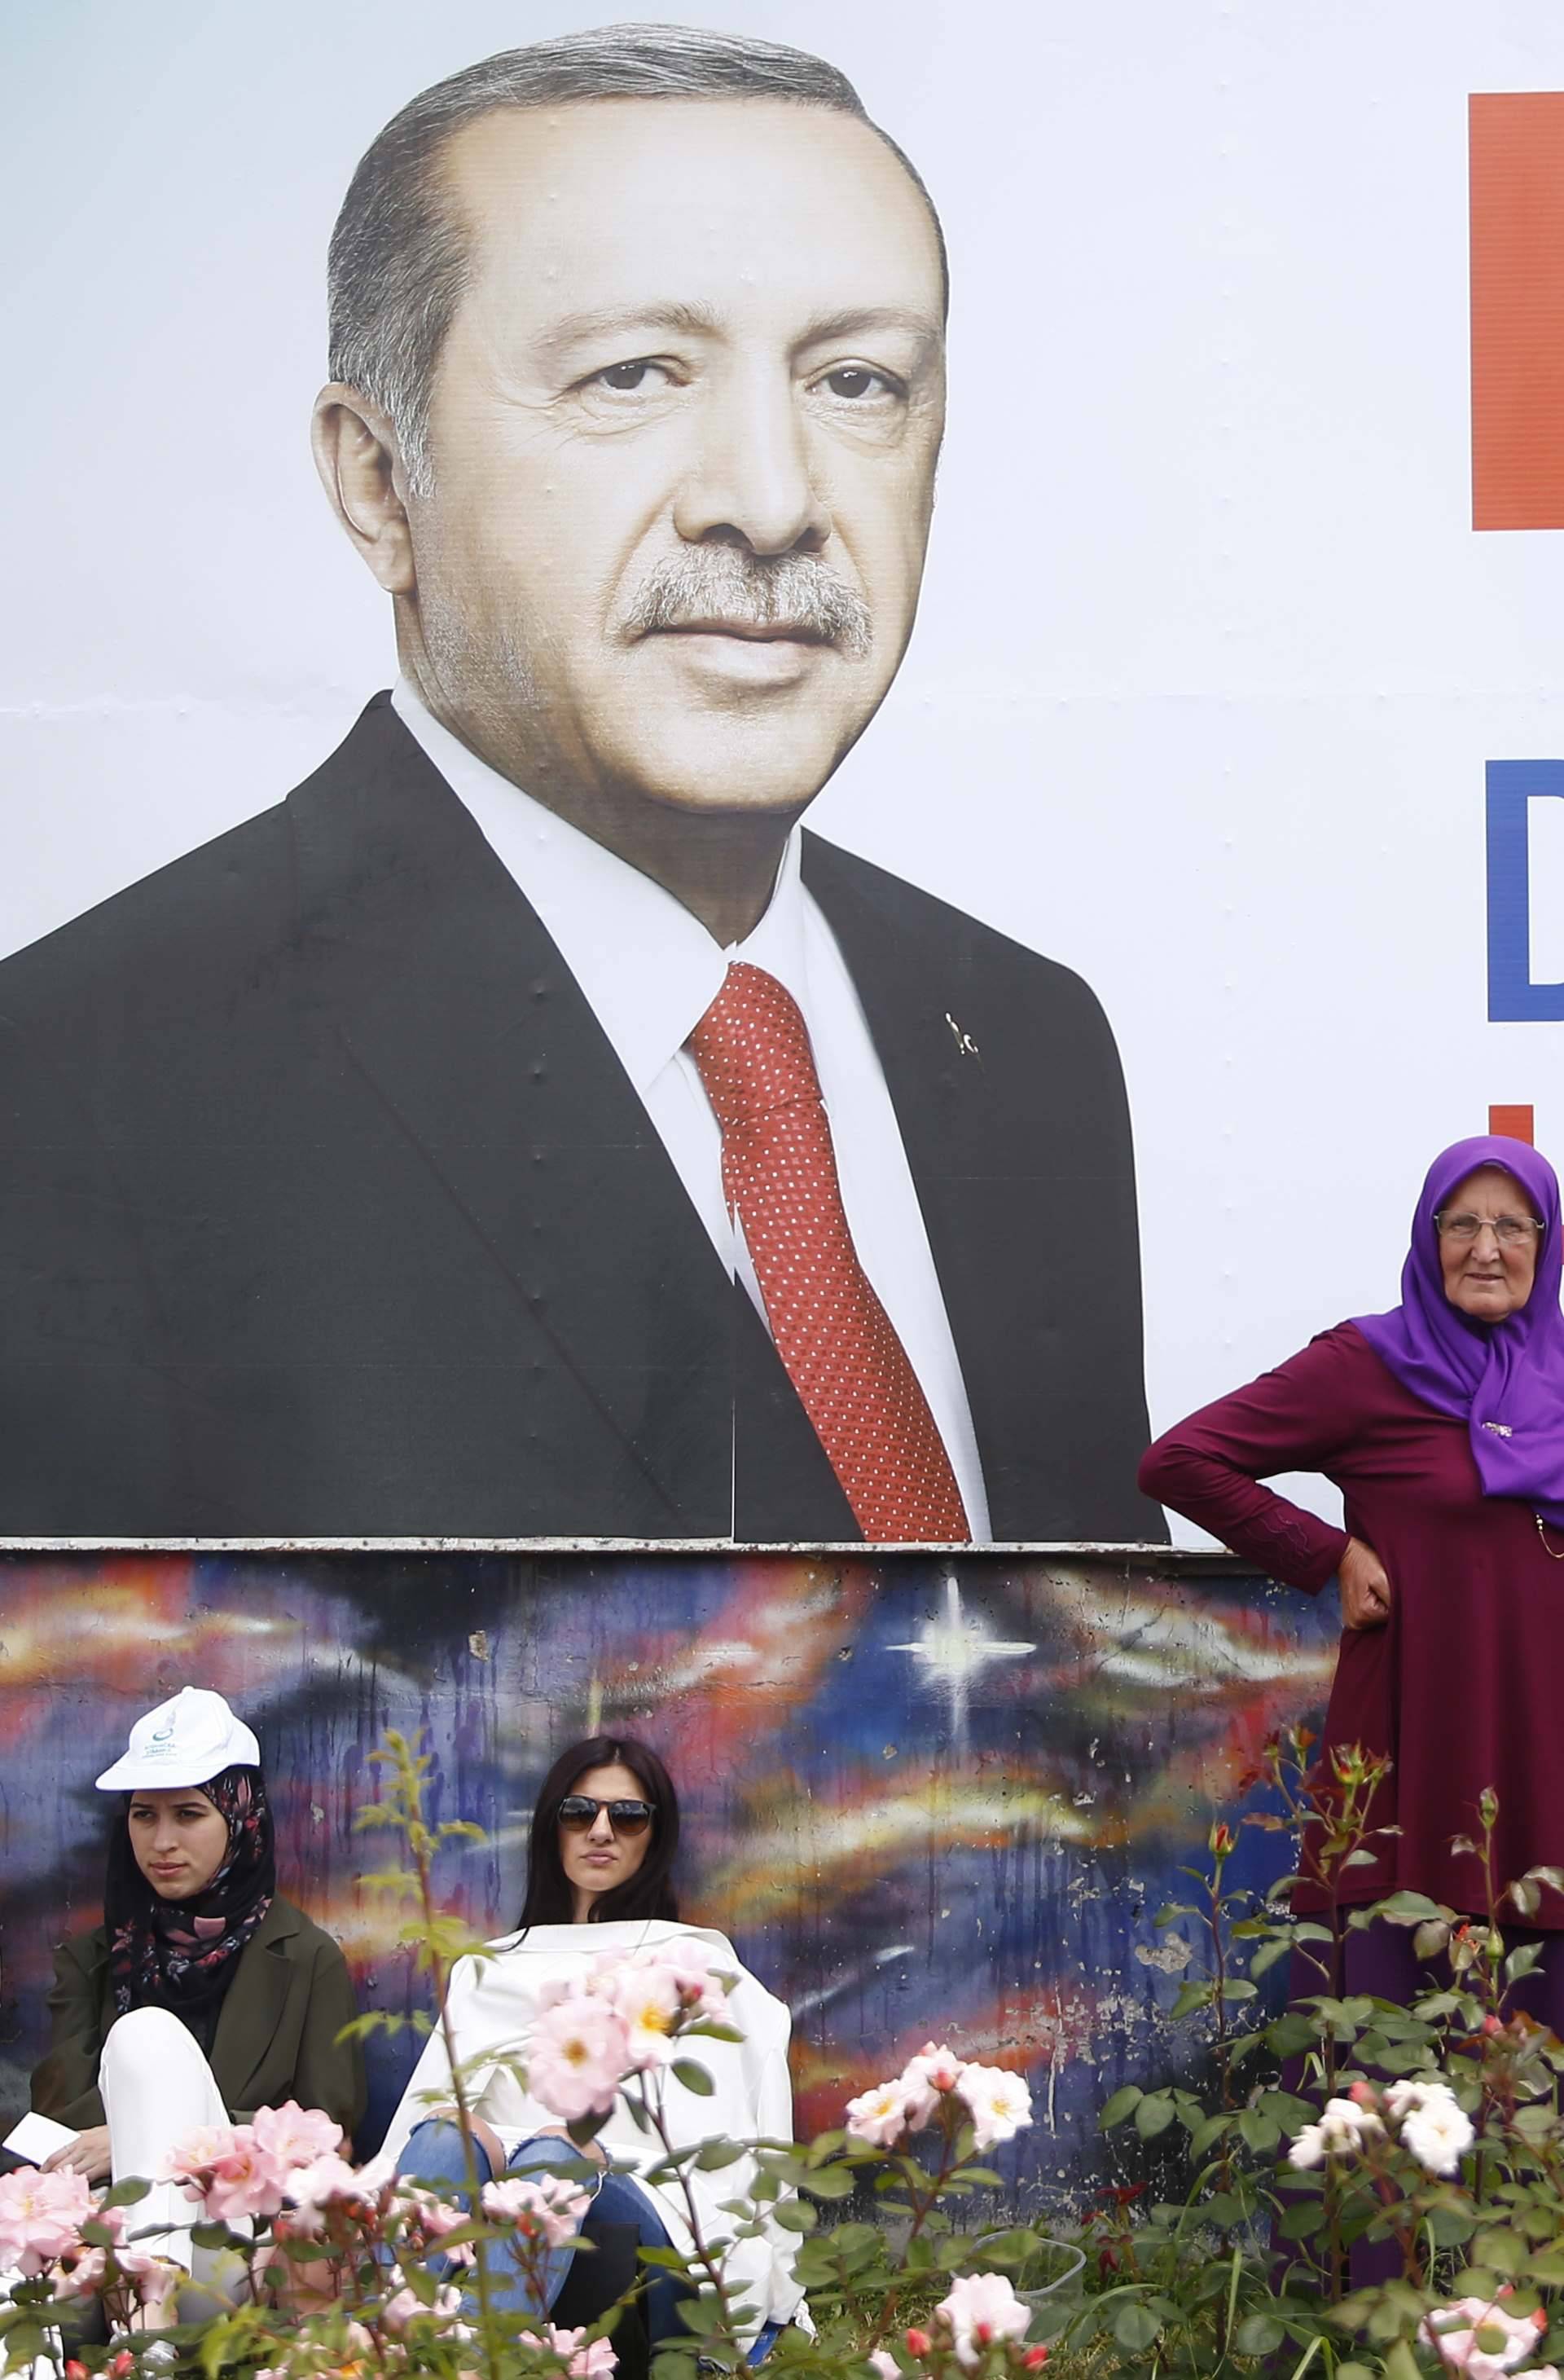 Supporters of Turkish President Erdogan gather before a pre-election rally in Sarajevo